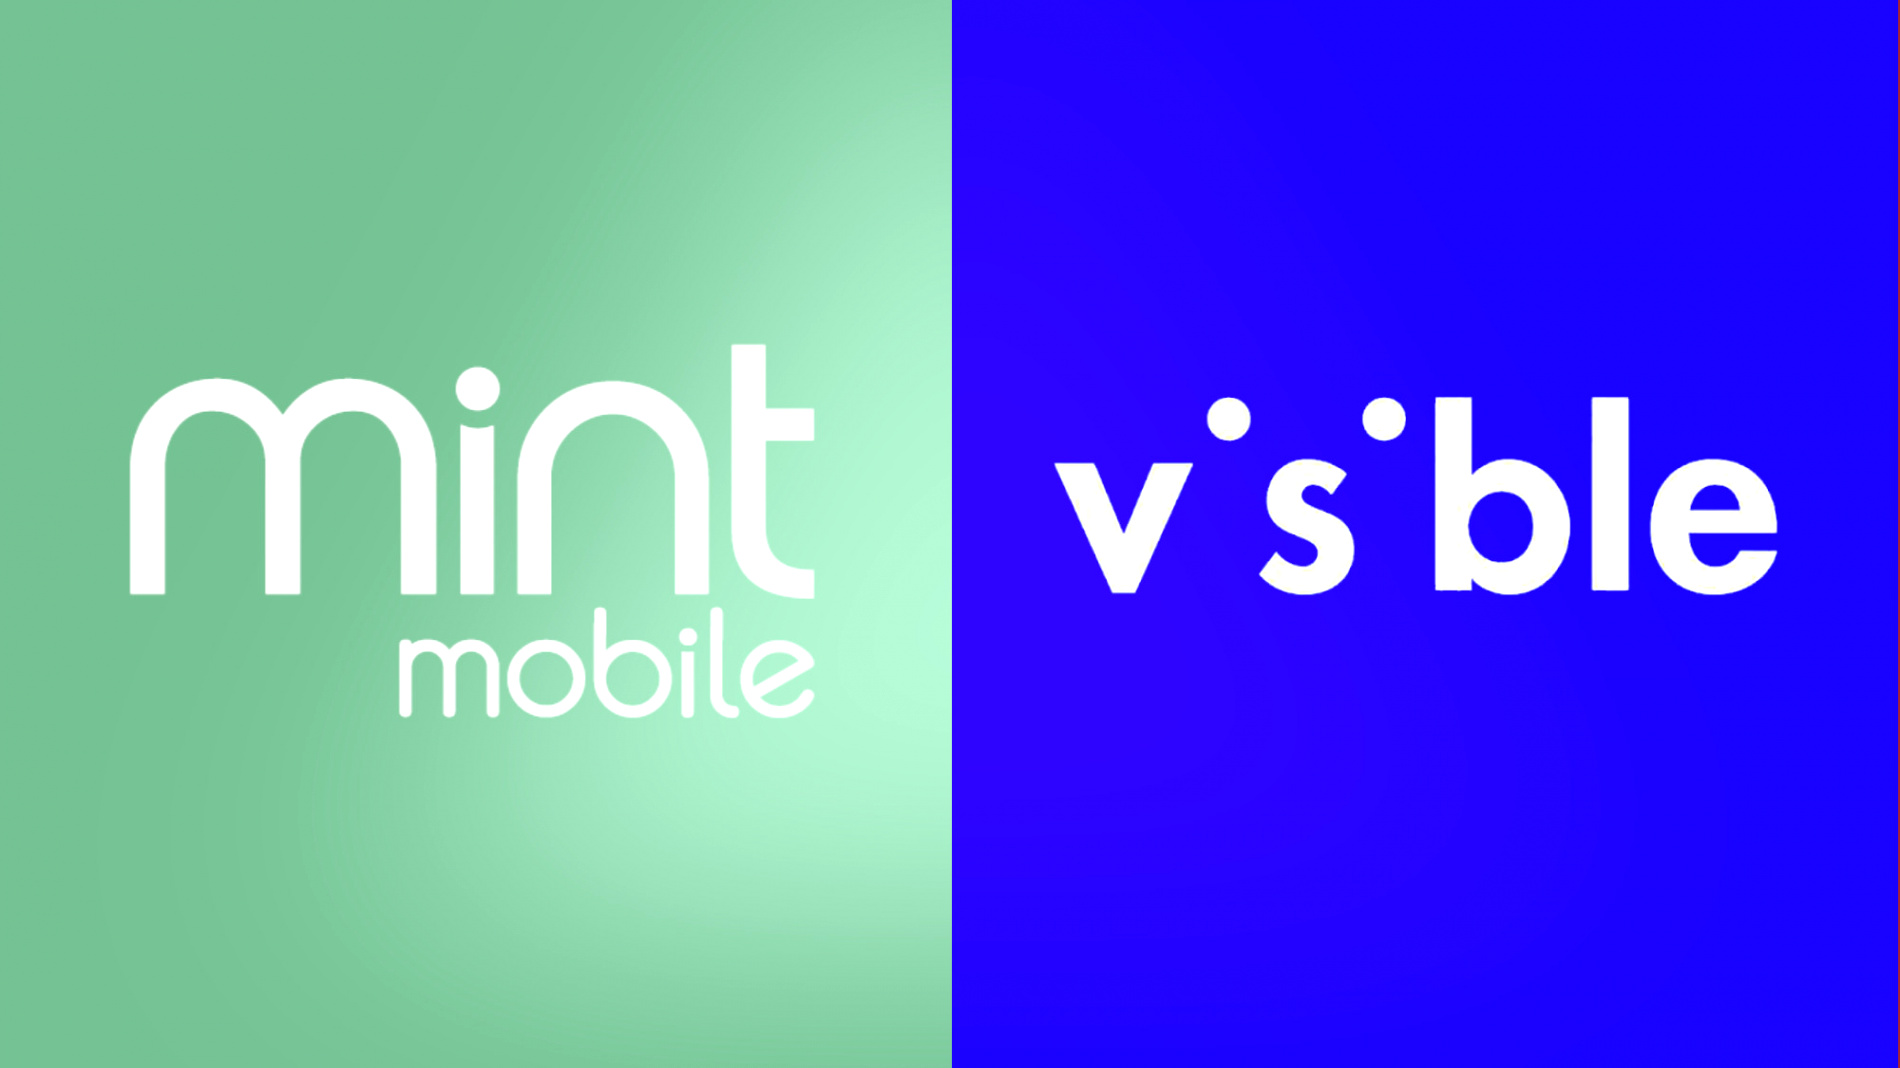 Cheap Vpn In Mercer Mo Dans Mint Mobile Vs Visible Wireless: which is the King Of the Cheap ...